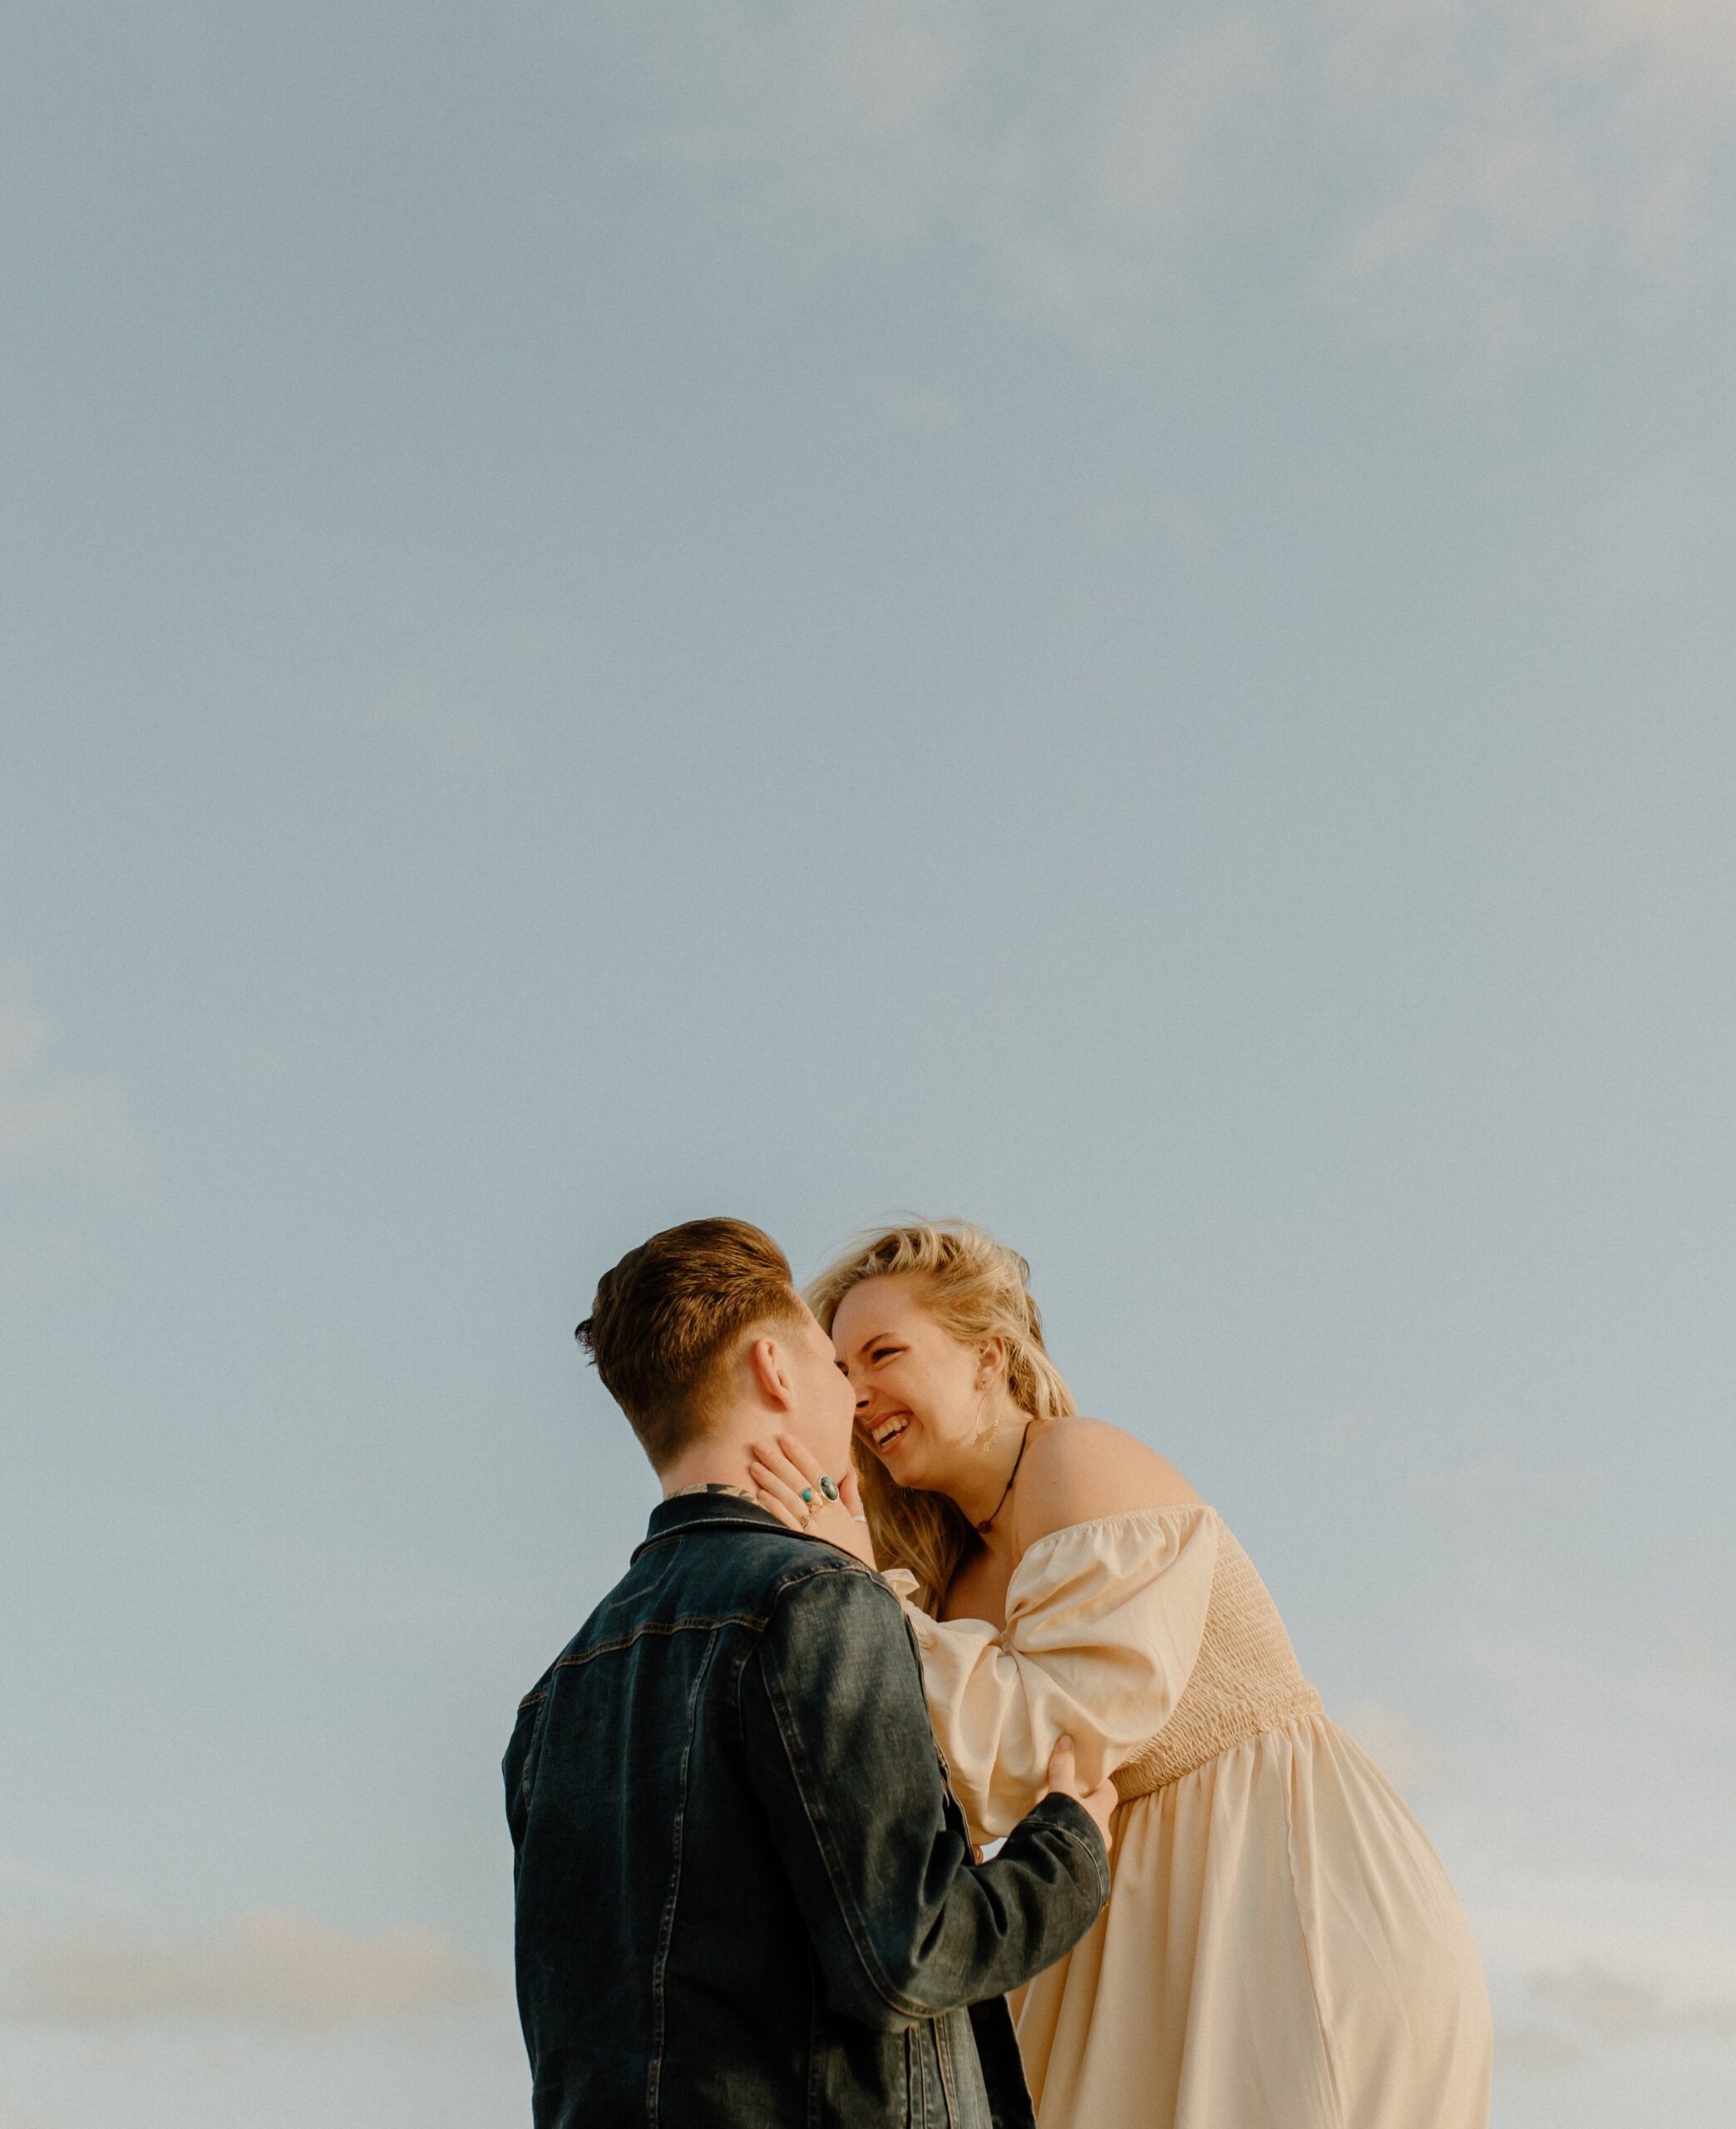 Man and woman looking into each other's eyes with background of blue skies